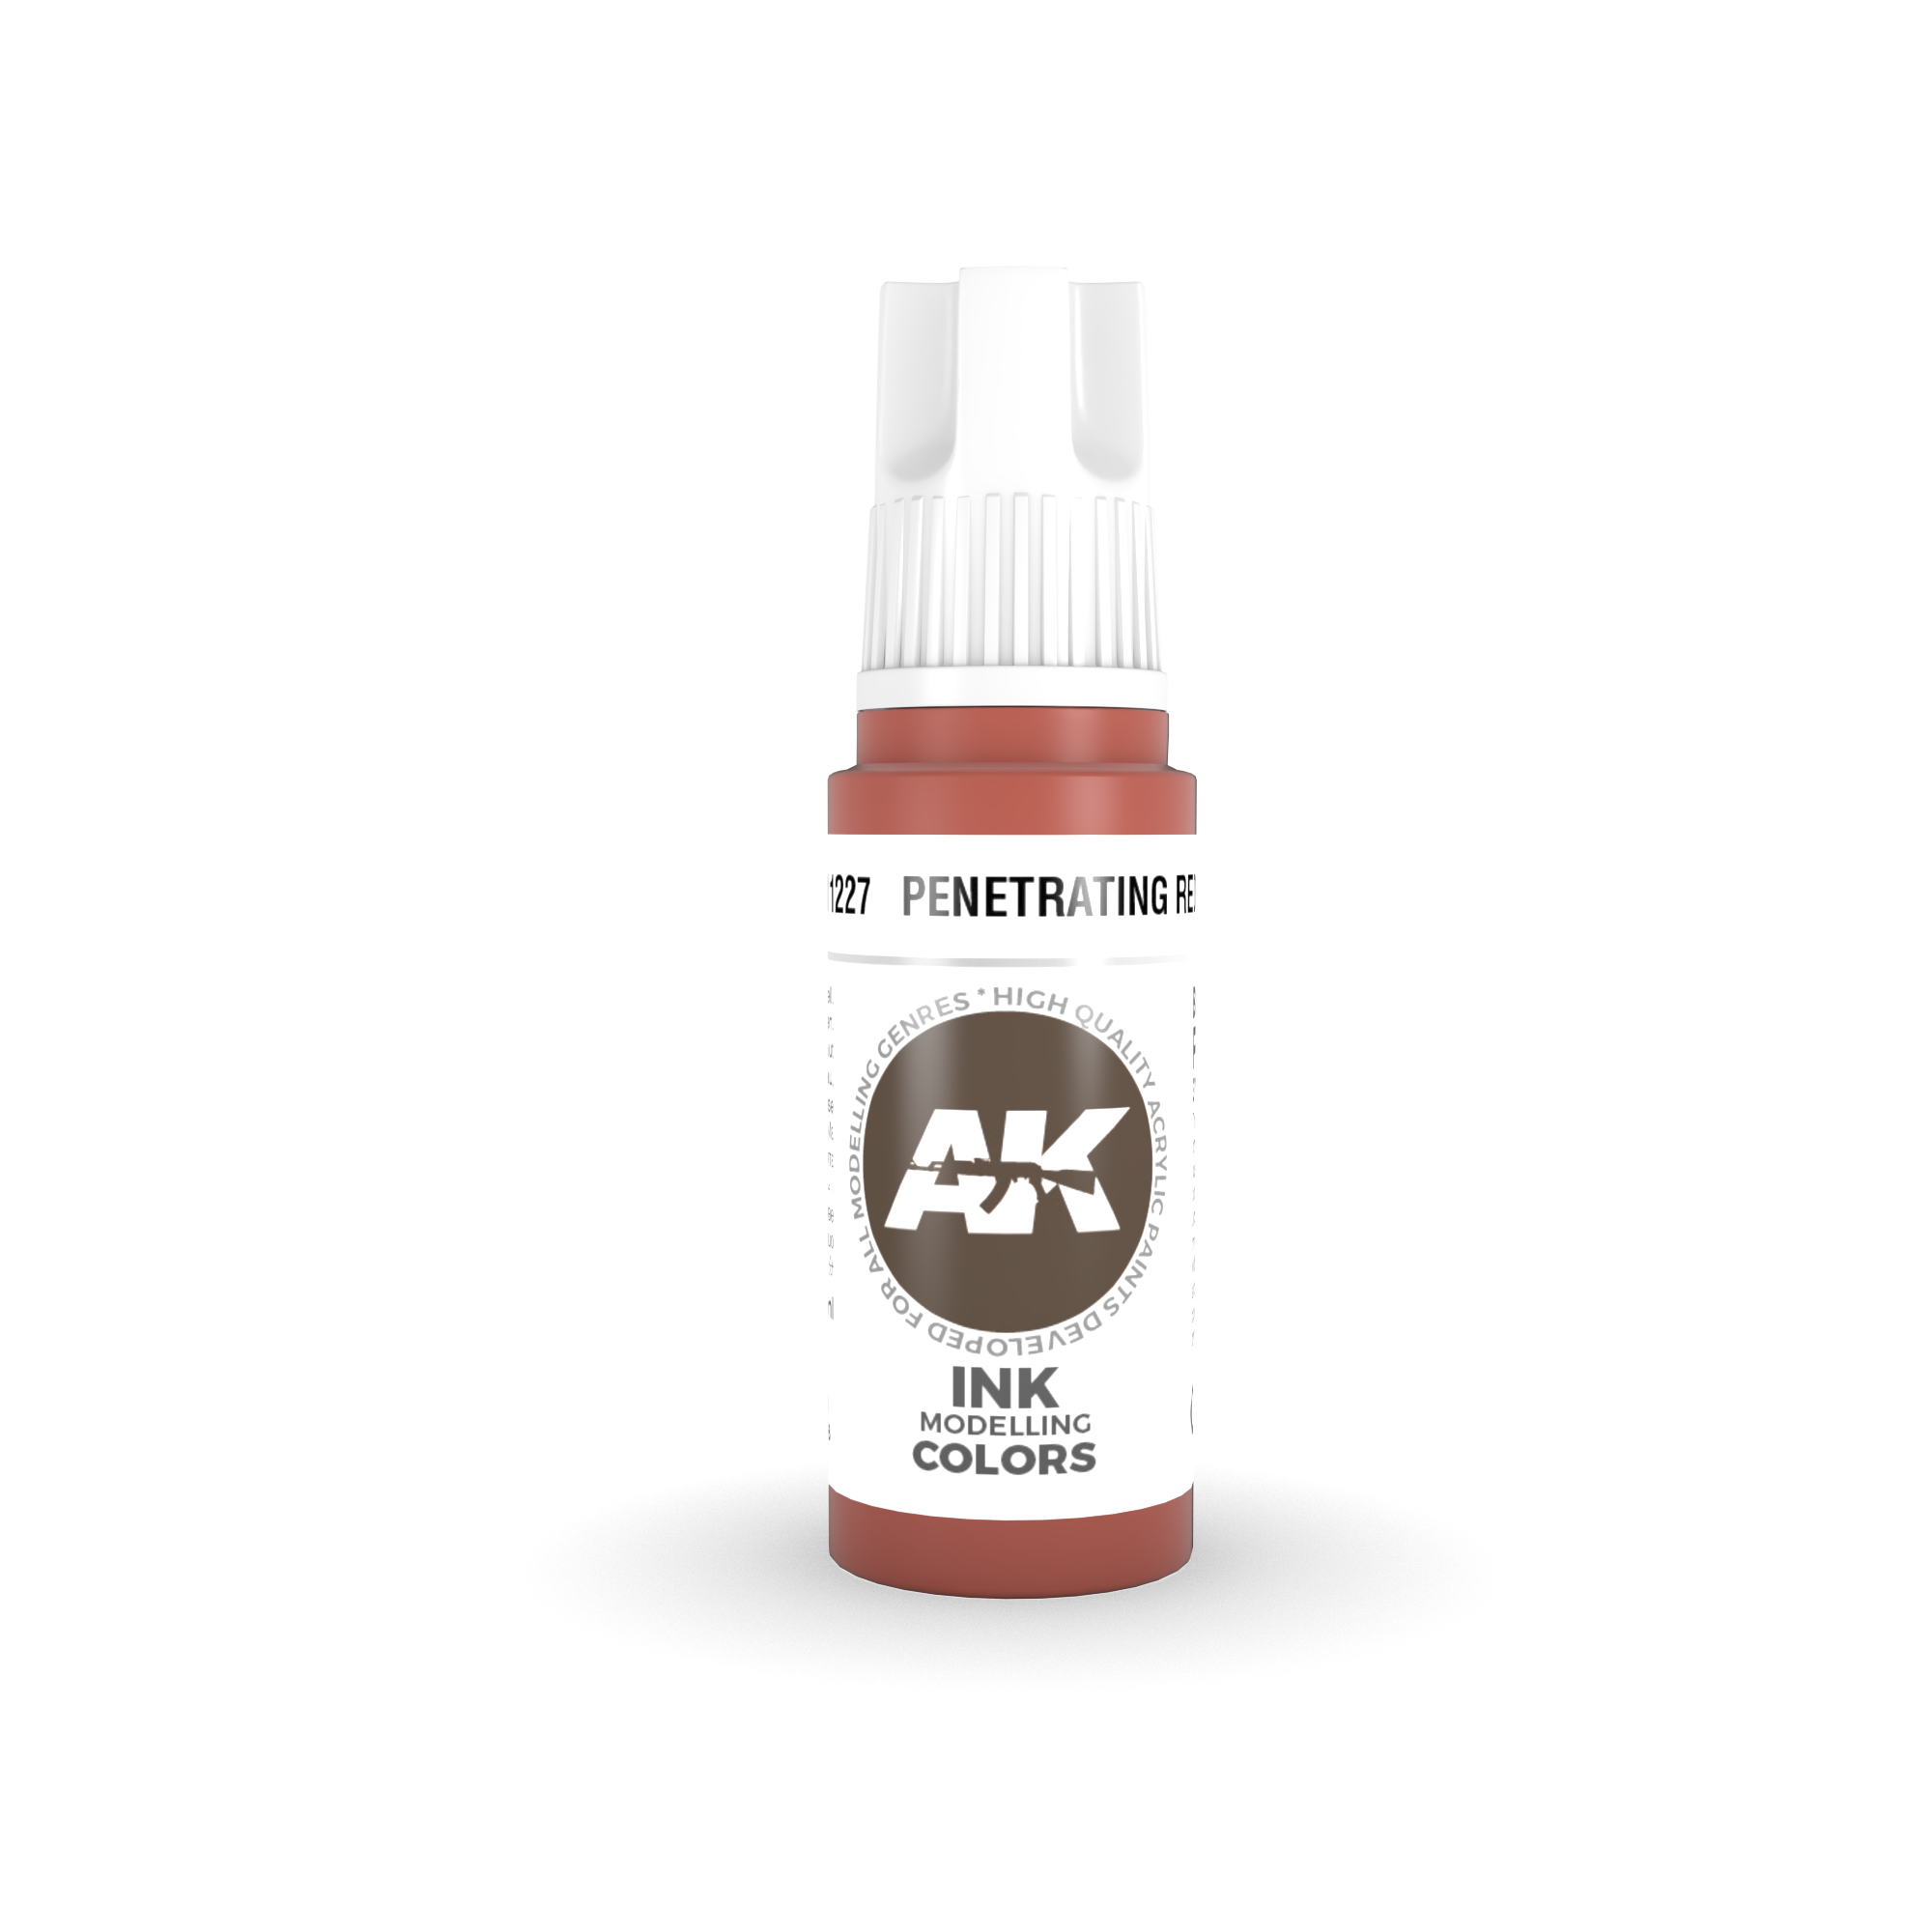 AK-Interactive Penetrating Red Ink Acrylic Modelling Color - 17ml - AK-11227